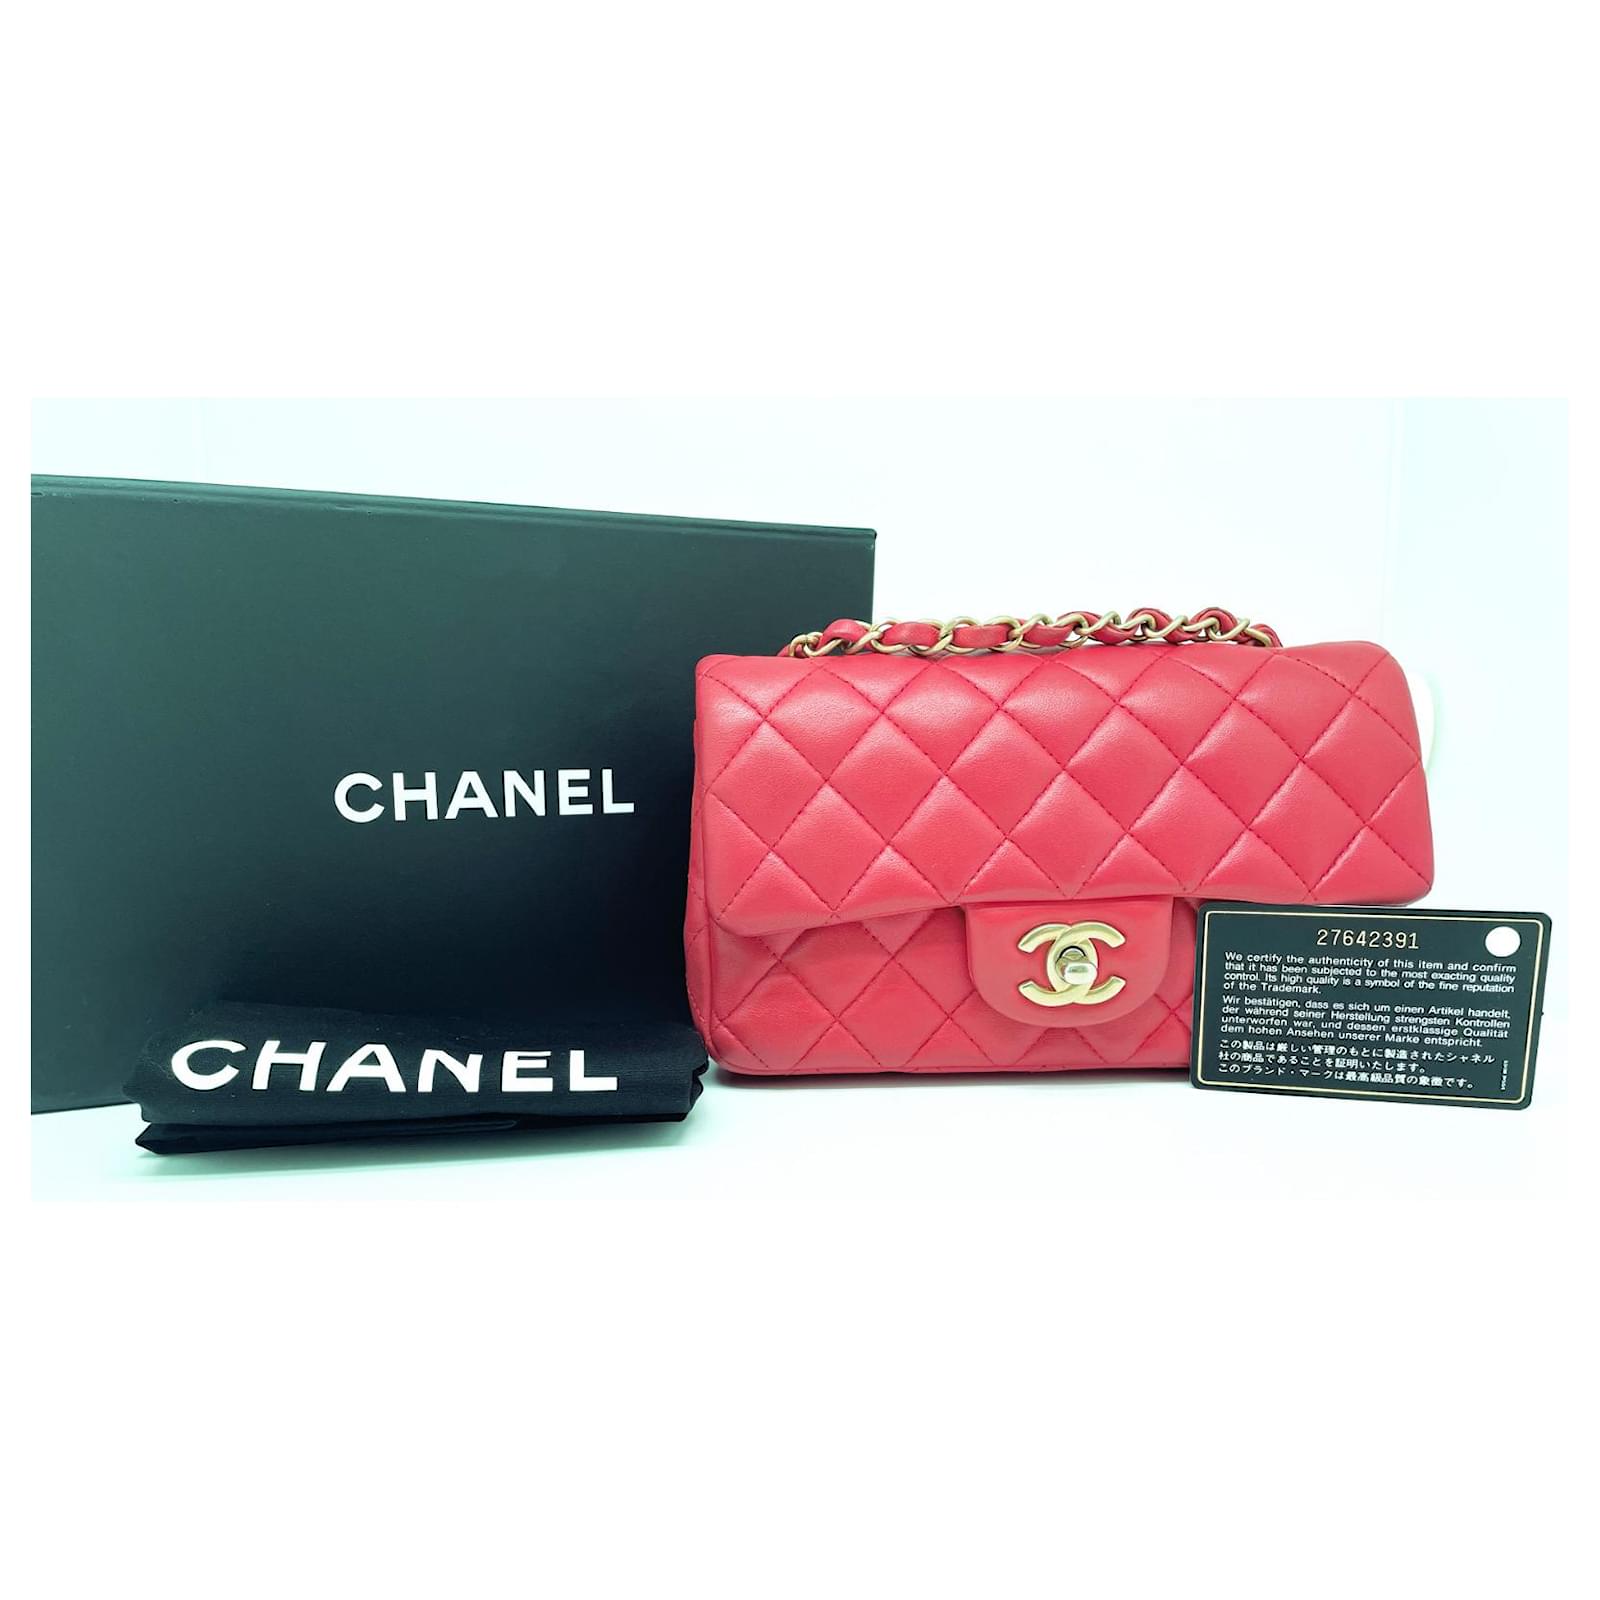 chanel clutch bag red leather